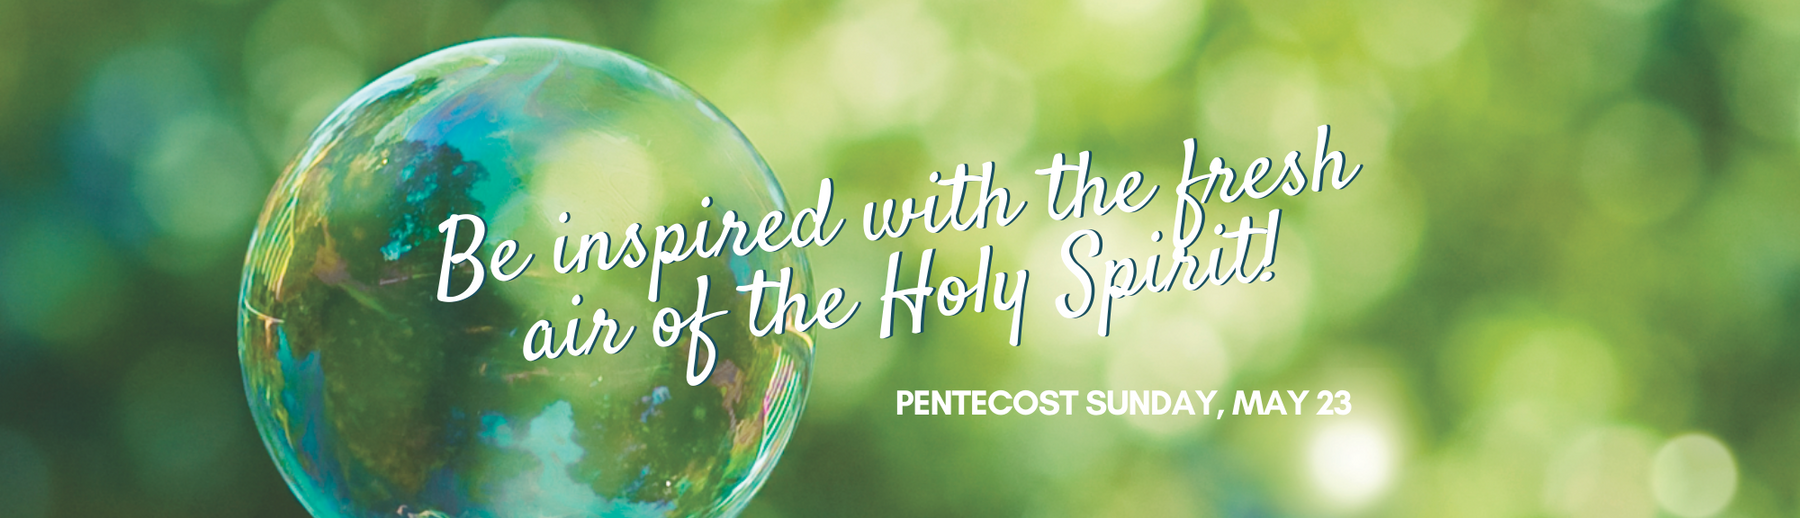 Be inspired by the fresh air of the Holy Spirit!